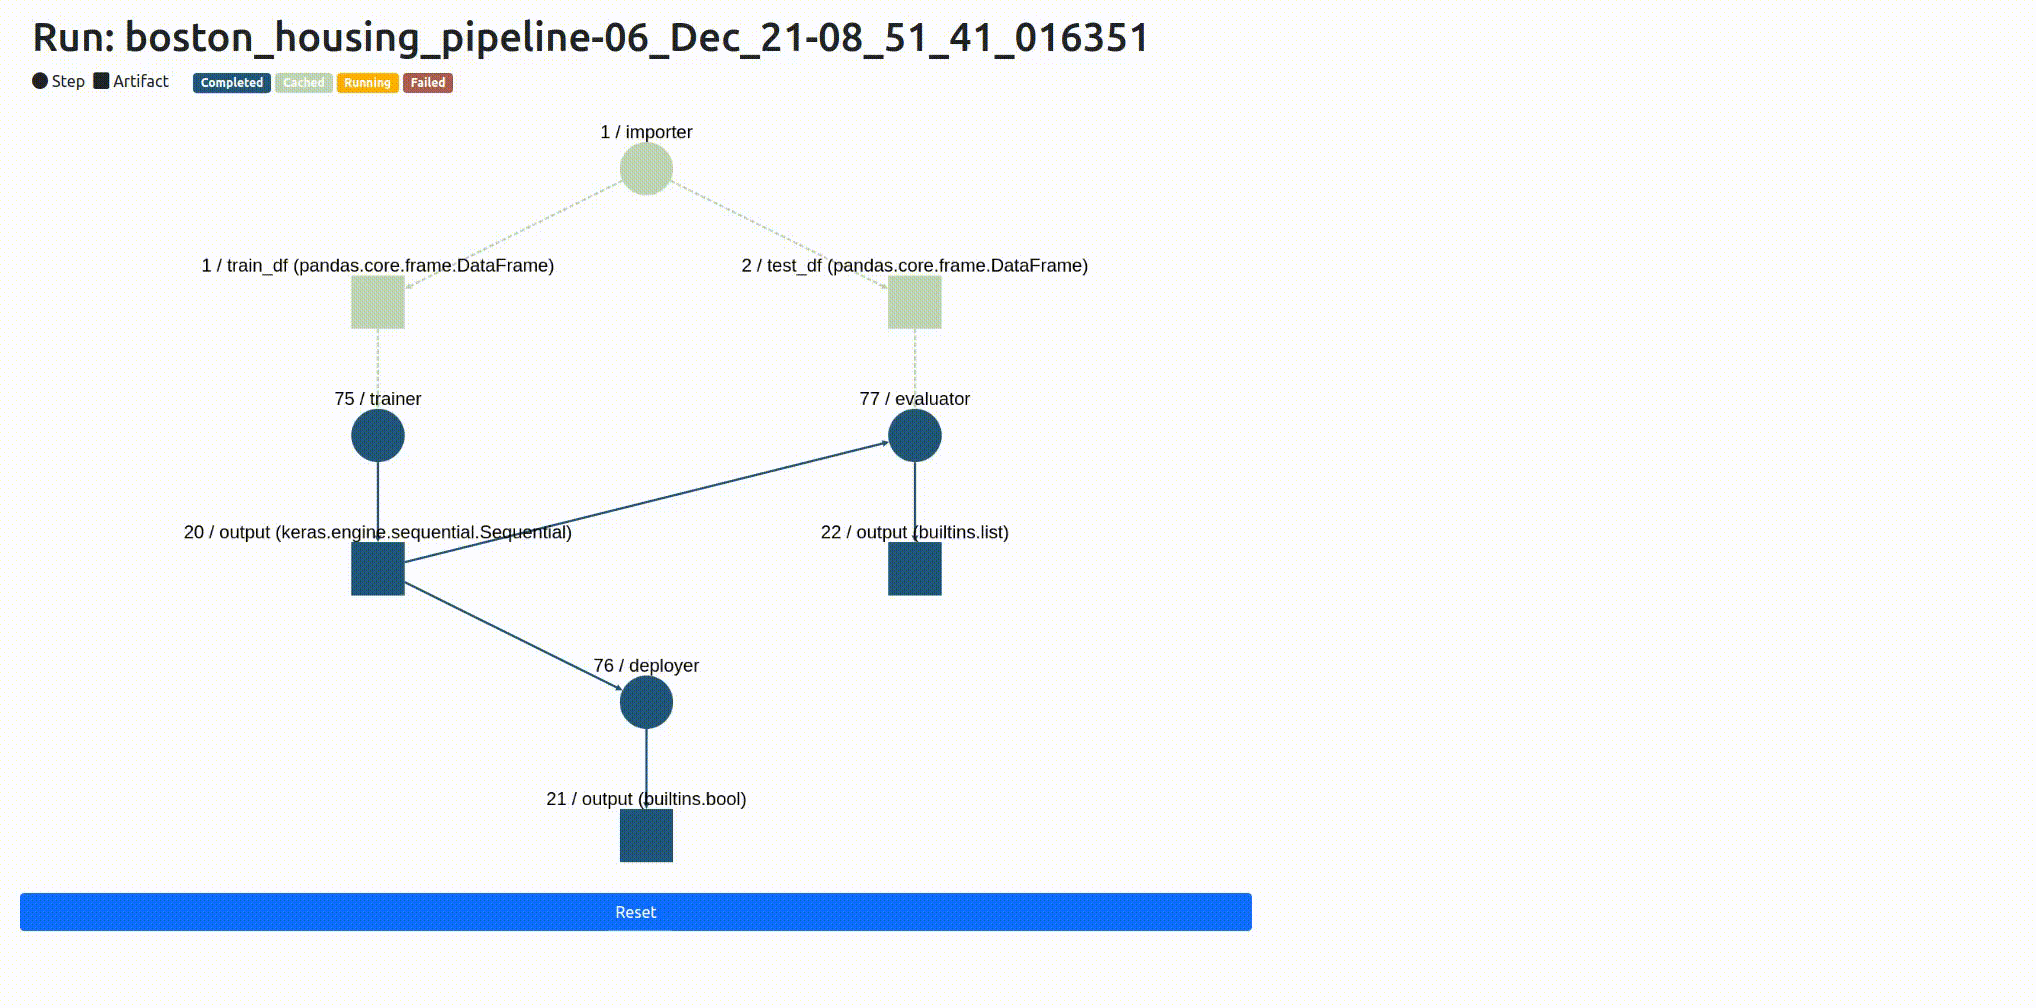 Here's what the pipeline lineage tracking visualizer looks like